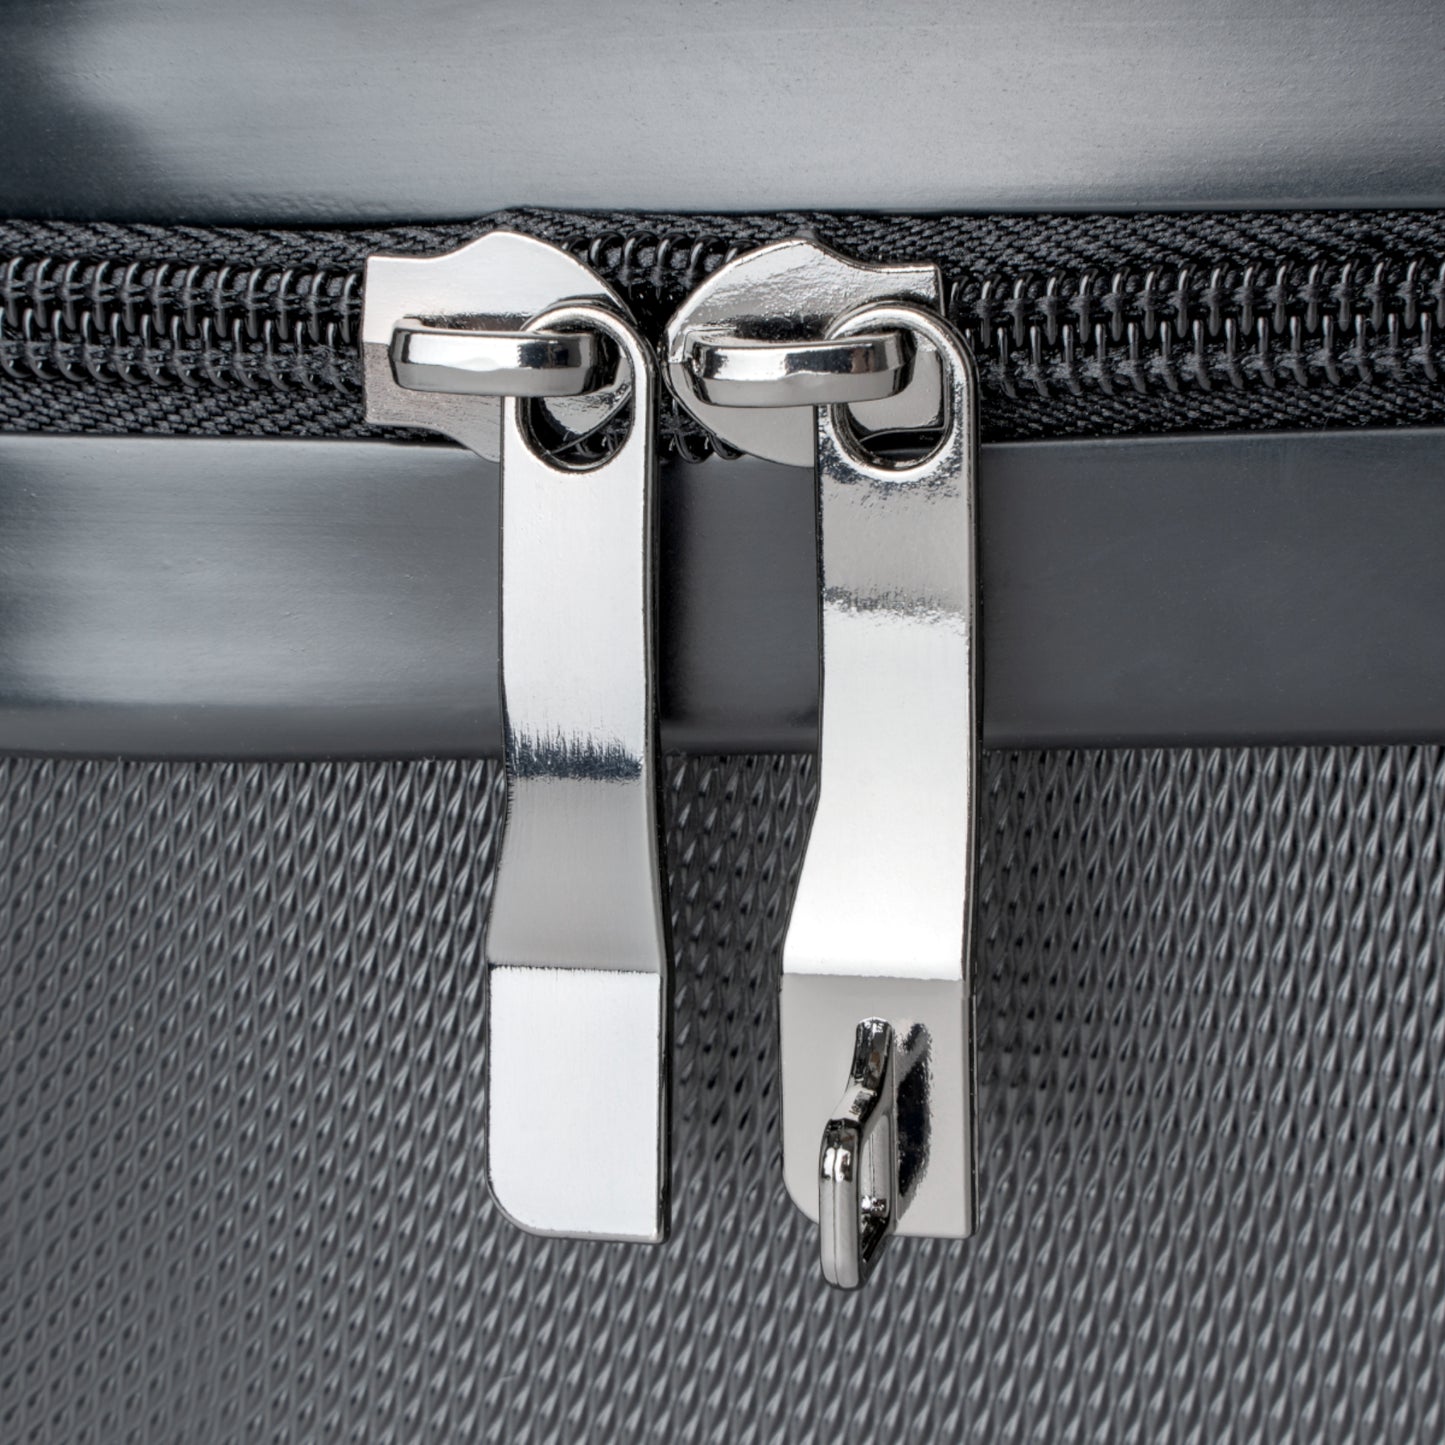 detail of stainless steel suitcase zipper